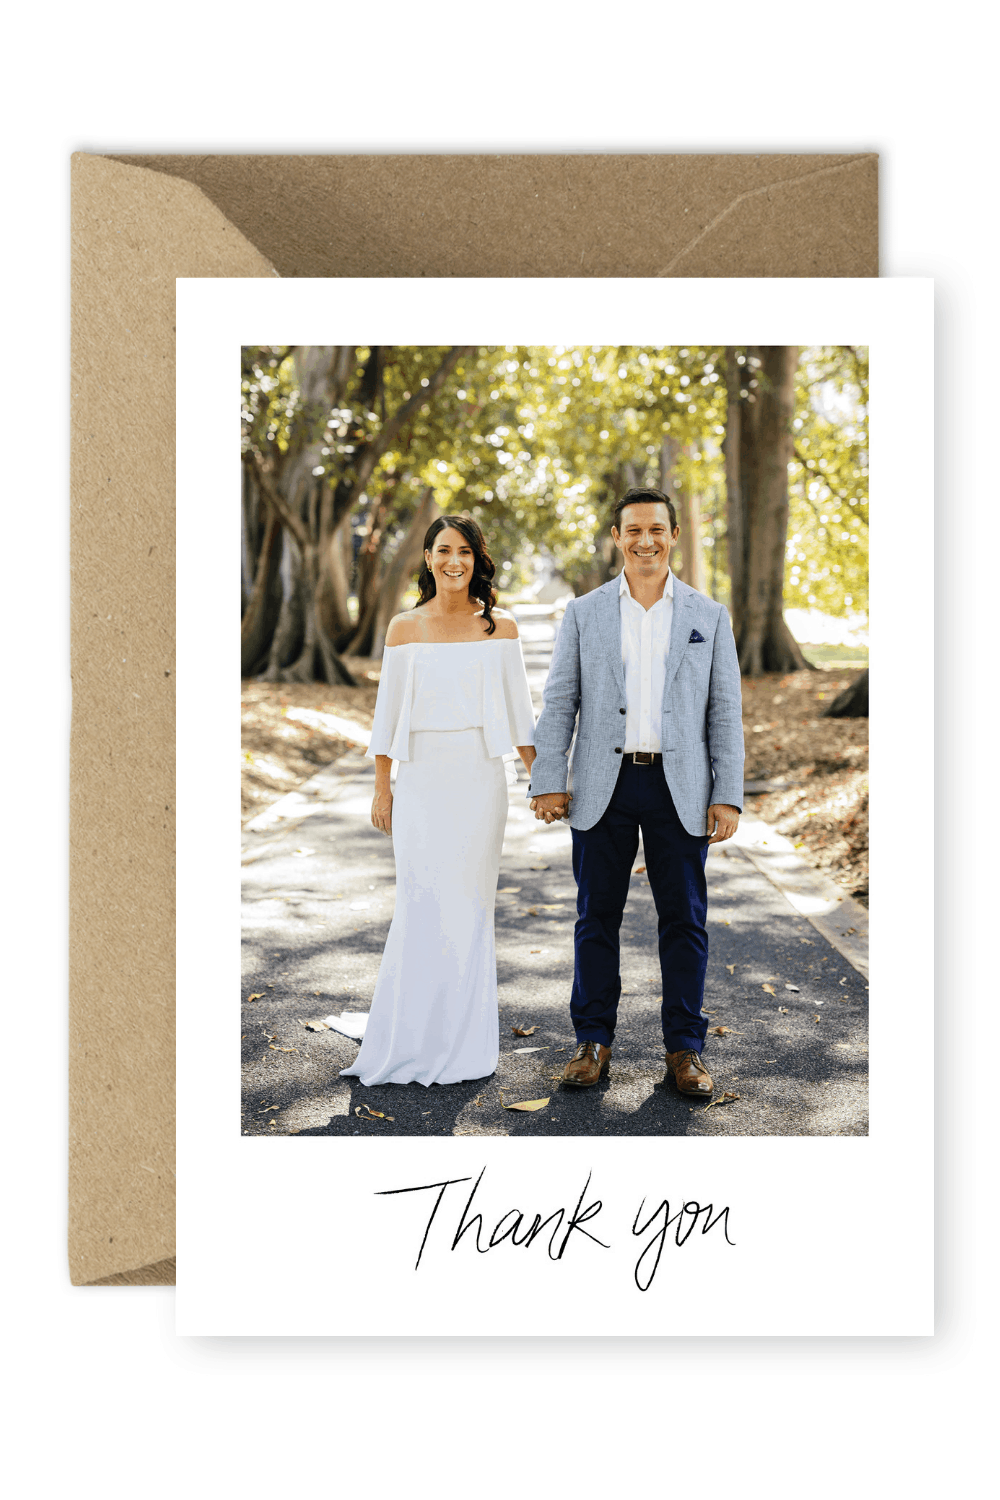 Wedding Thank You Cards with Photos Simple Design For the Love of Stationery Adam Gibson Photographer